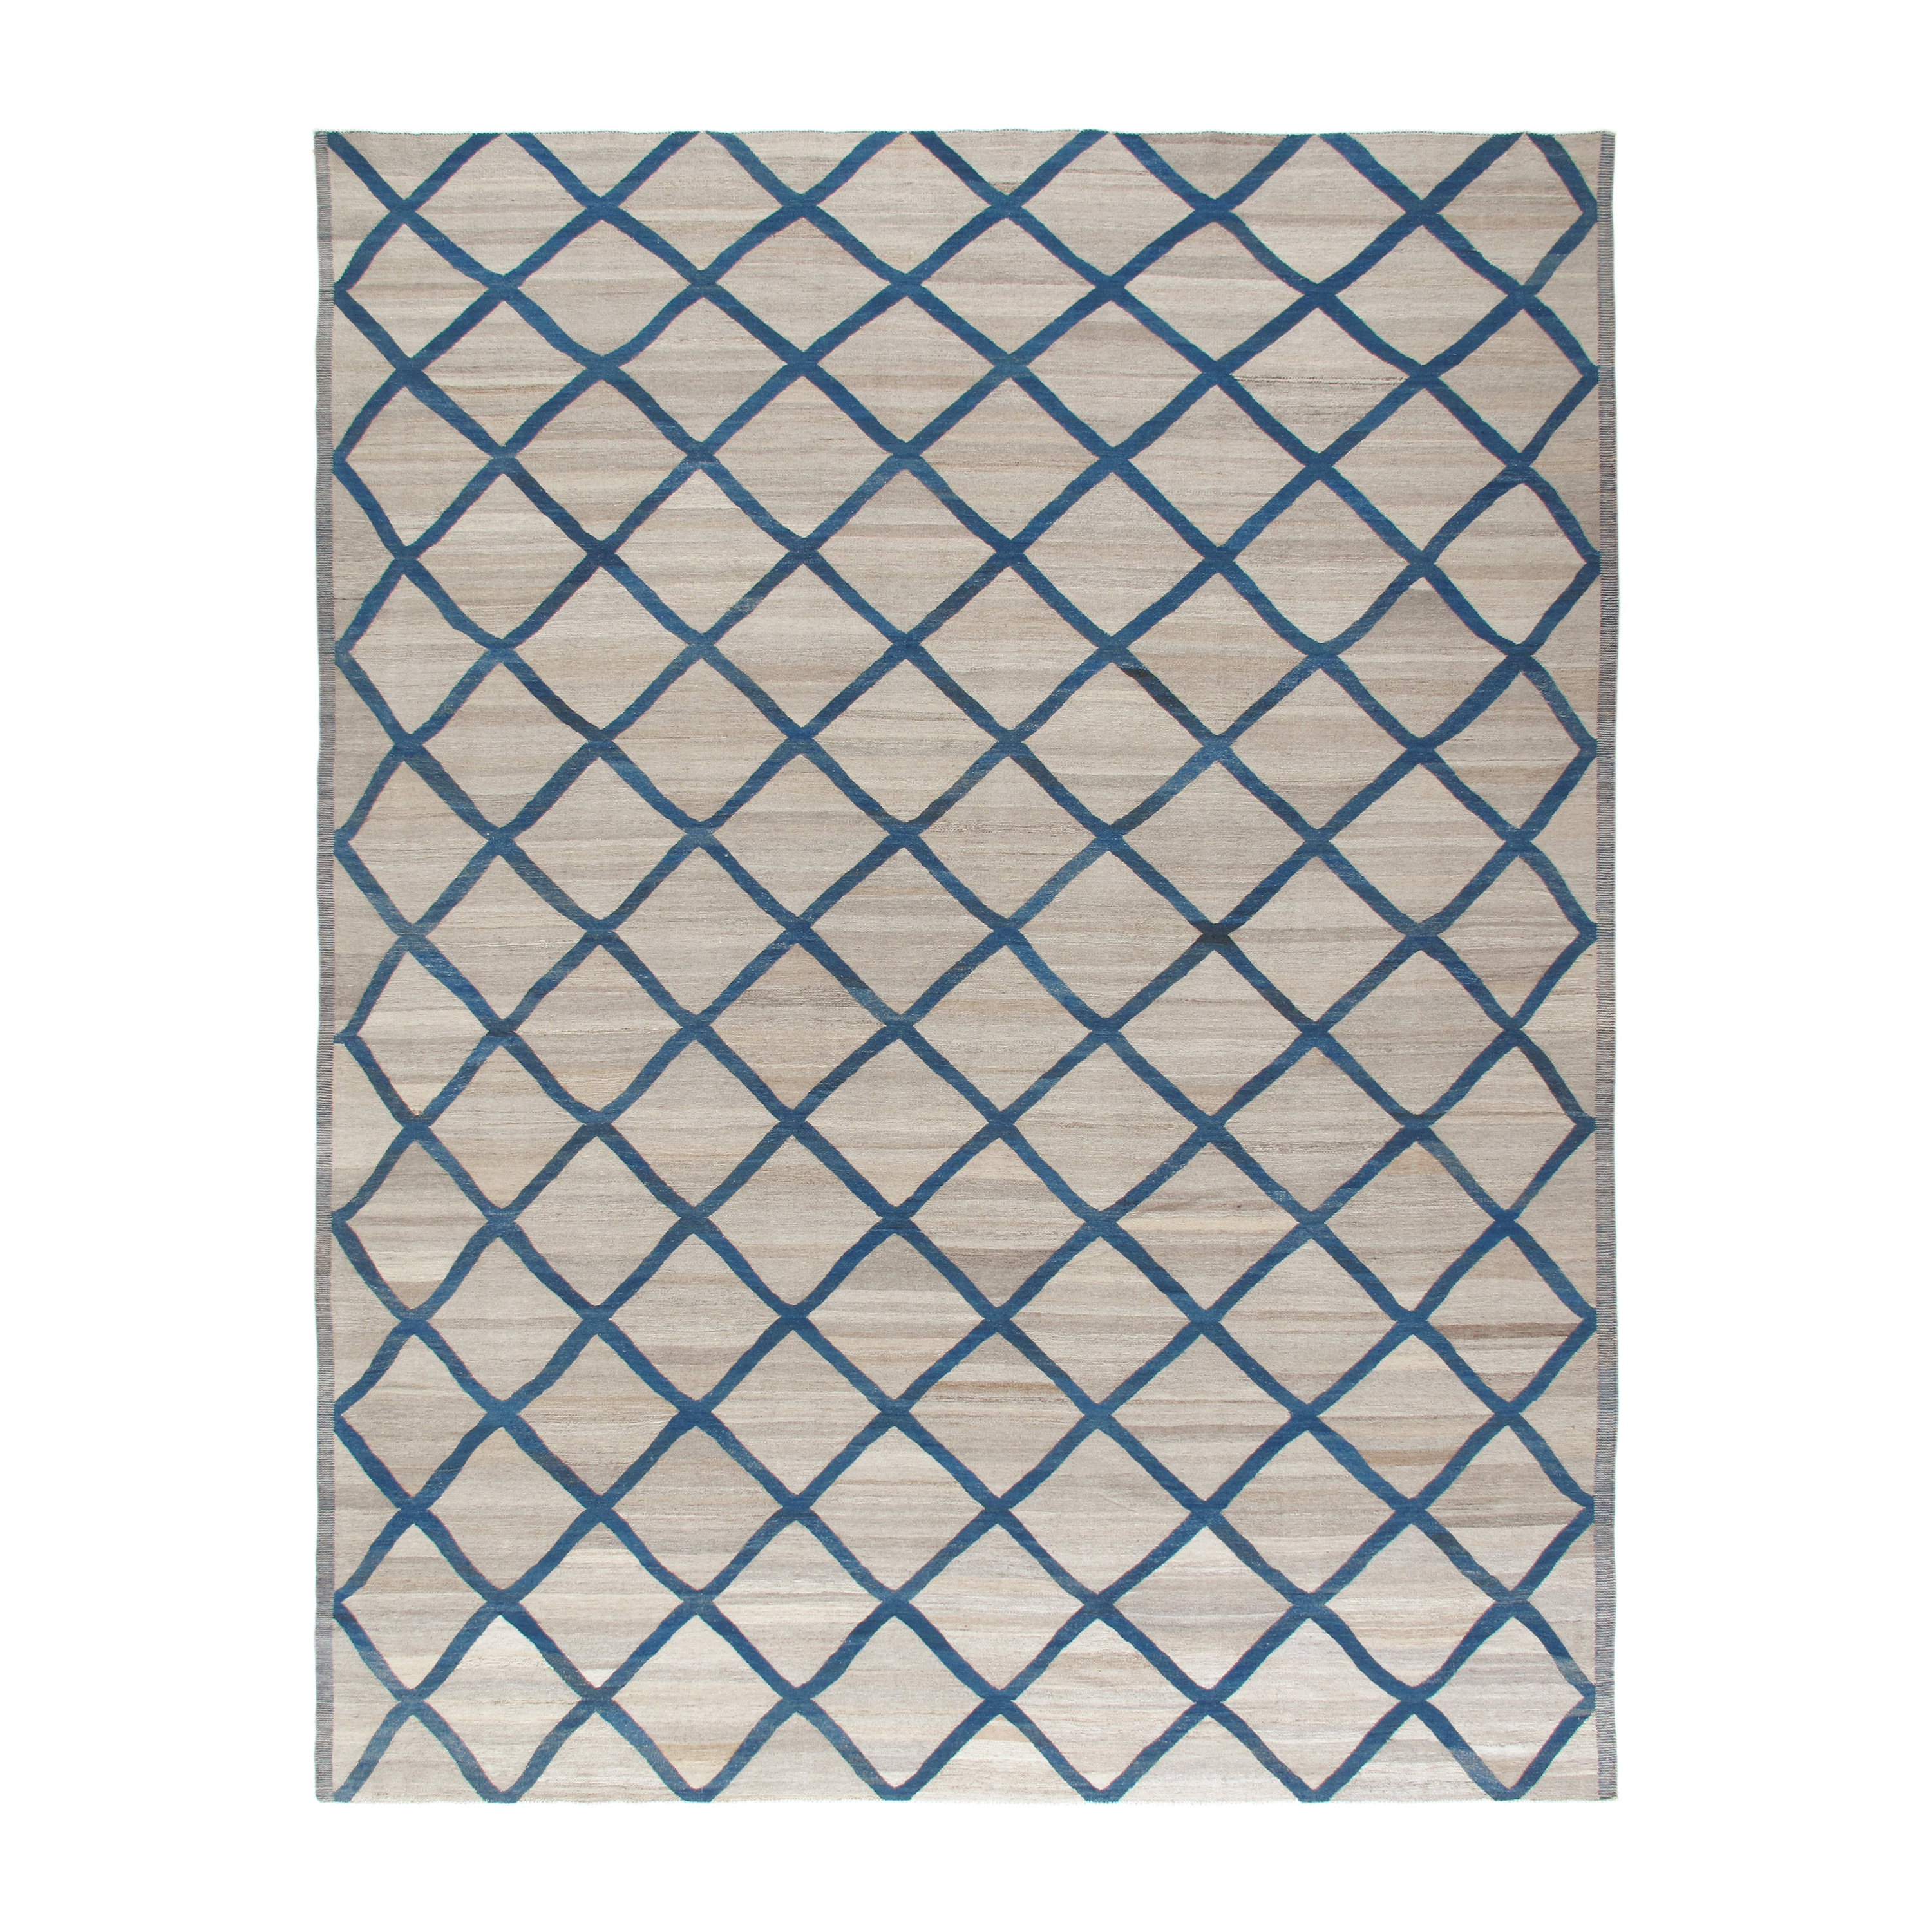 This Shirz Rug is hand-woven and made 100% wool. 